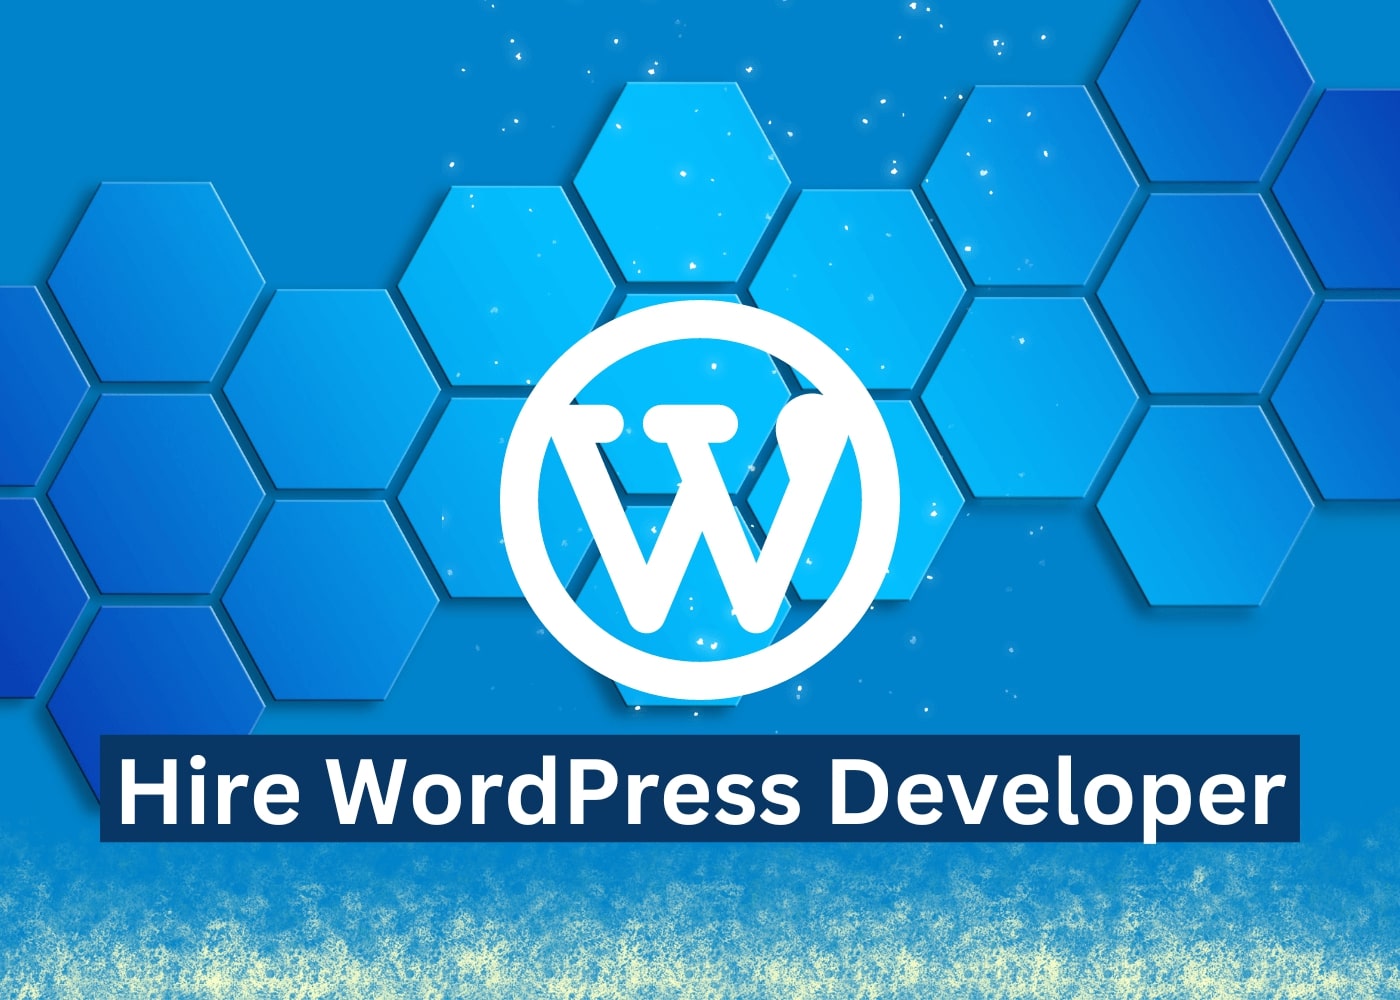 Is it a Good Idea to Hire a WordPress Developer to Build My Website?